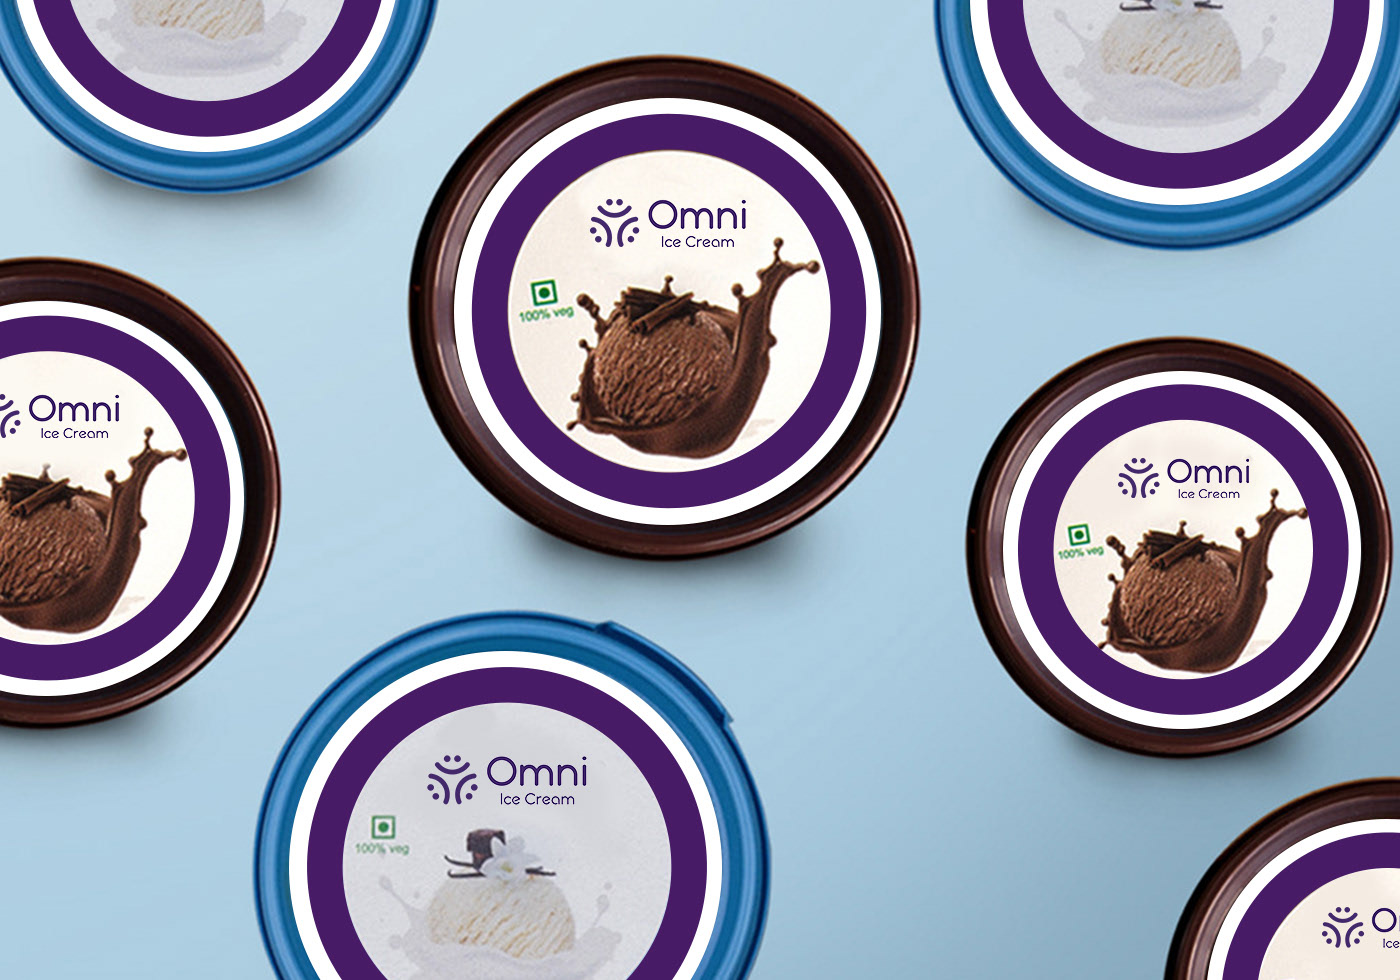 Omni Ice Cream Identity and Packaging Design by Vowels